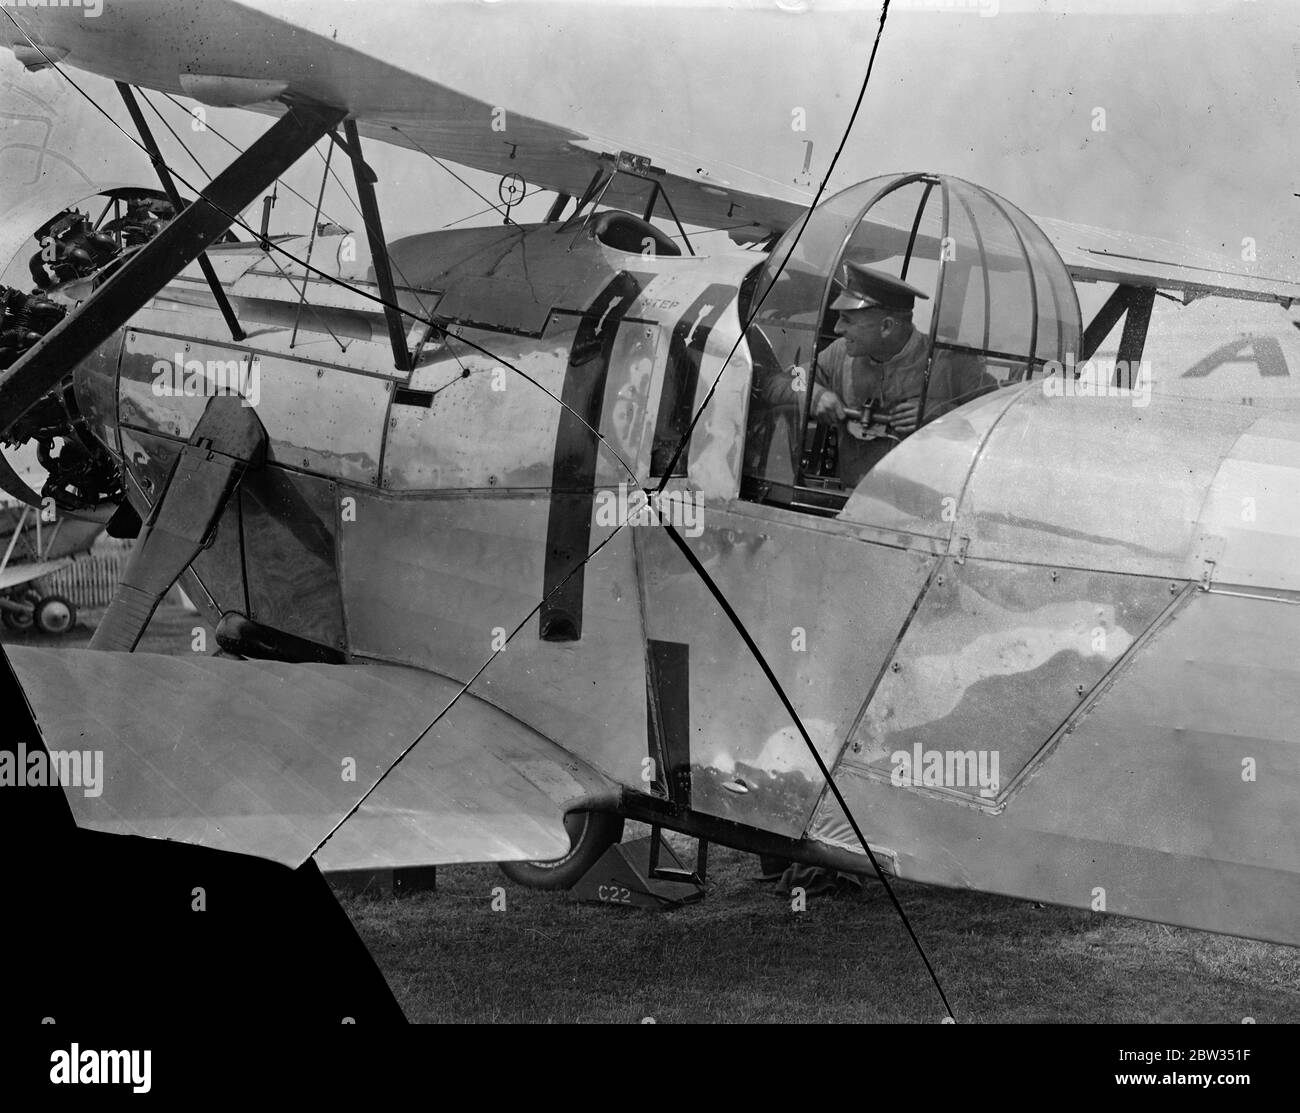 Cages for Air Force gunners . An innovation seen at the Royal Air Force Pageant at Hendon is a wind proof cage covering the gunners cockpit on aircraft . A gunner in his cage at Hendon Aerodrome during the Pageant rehearsal . 23 June 1932 Stock Photo